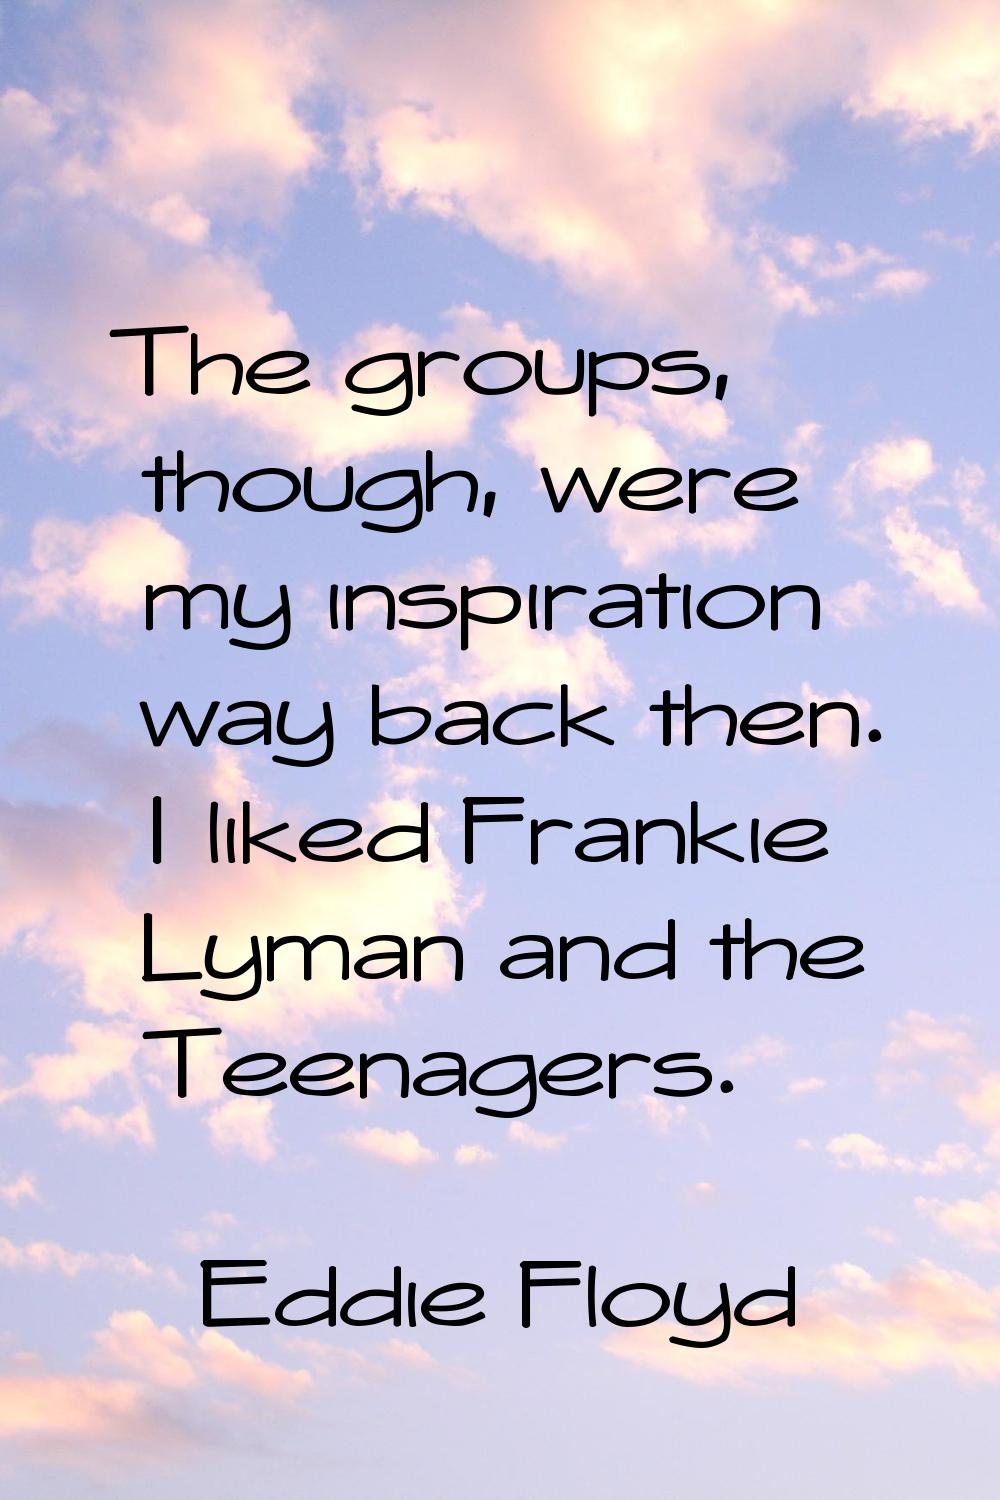 The groups, though, were my inspiration way back then. I liked Frankie Lyman and the Teenagers.